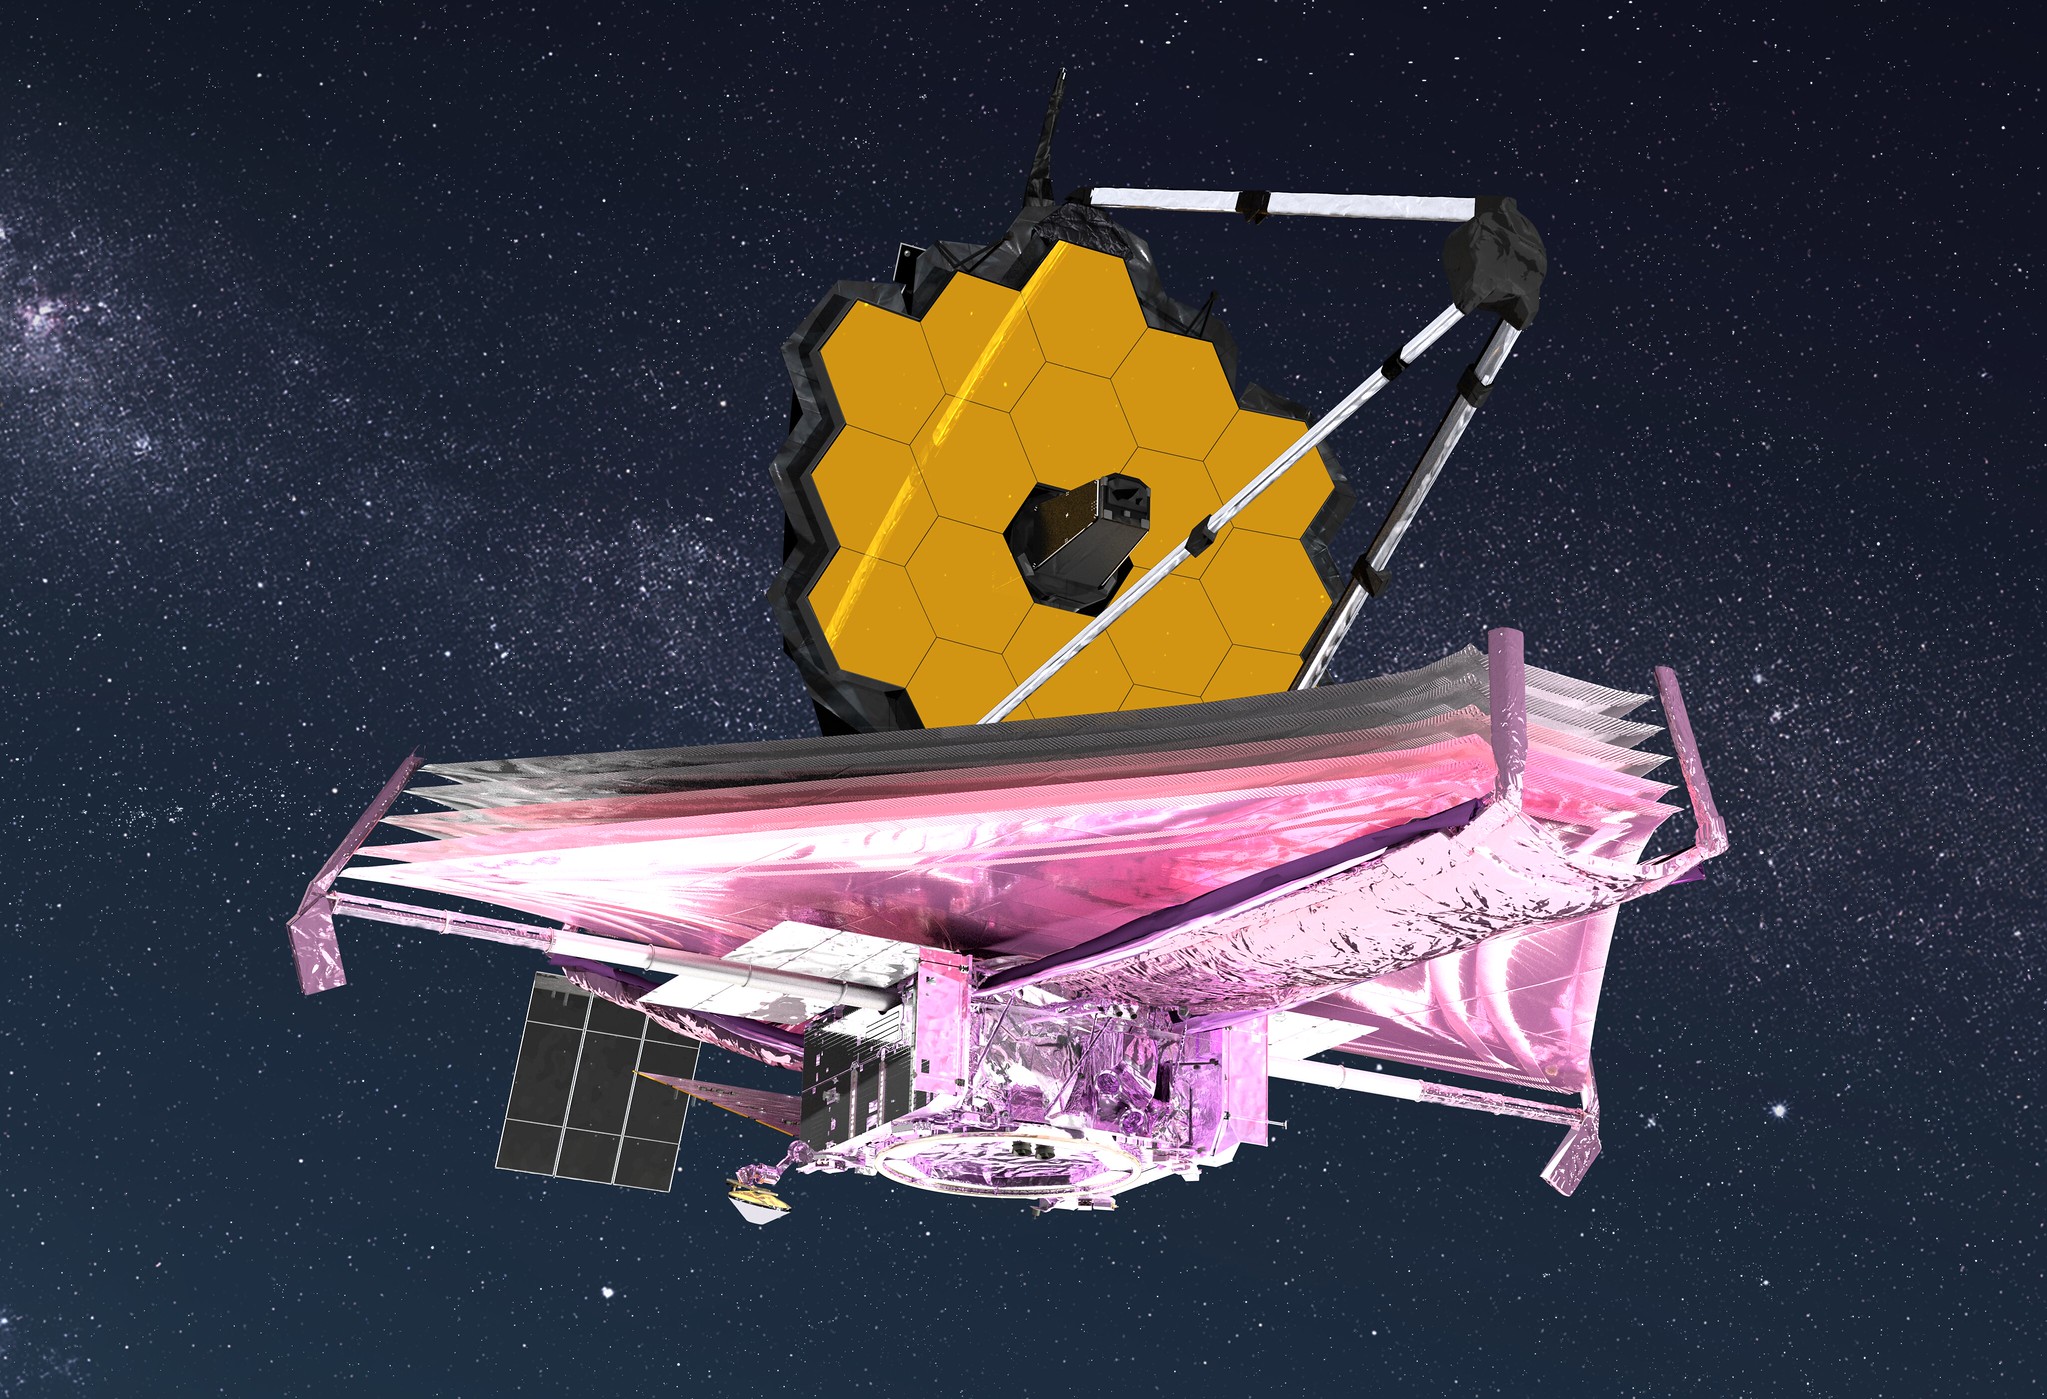 When Will NASA's Groundbreaking James Webb Space Telescope Launch and